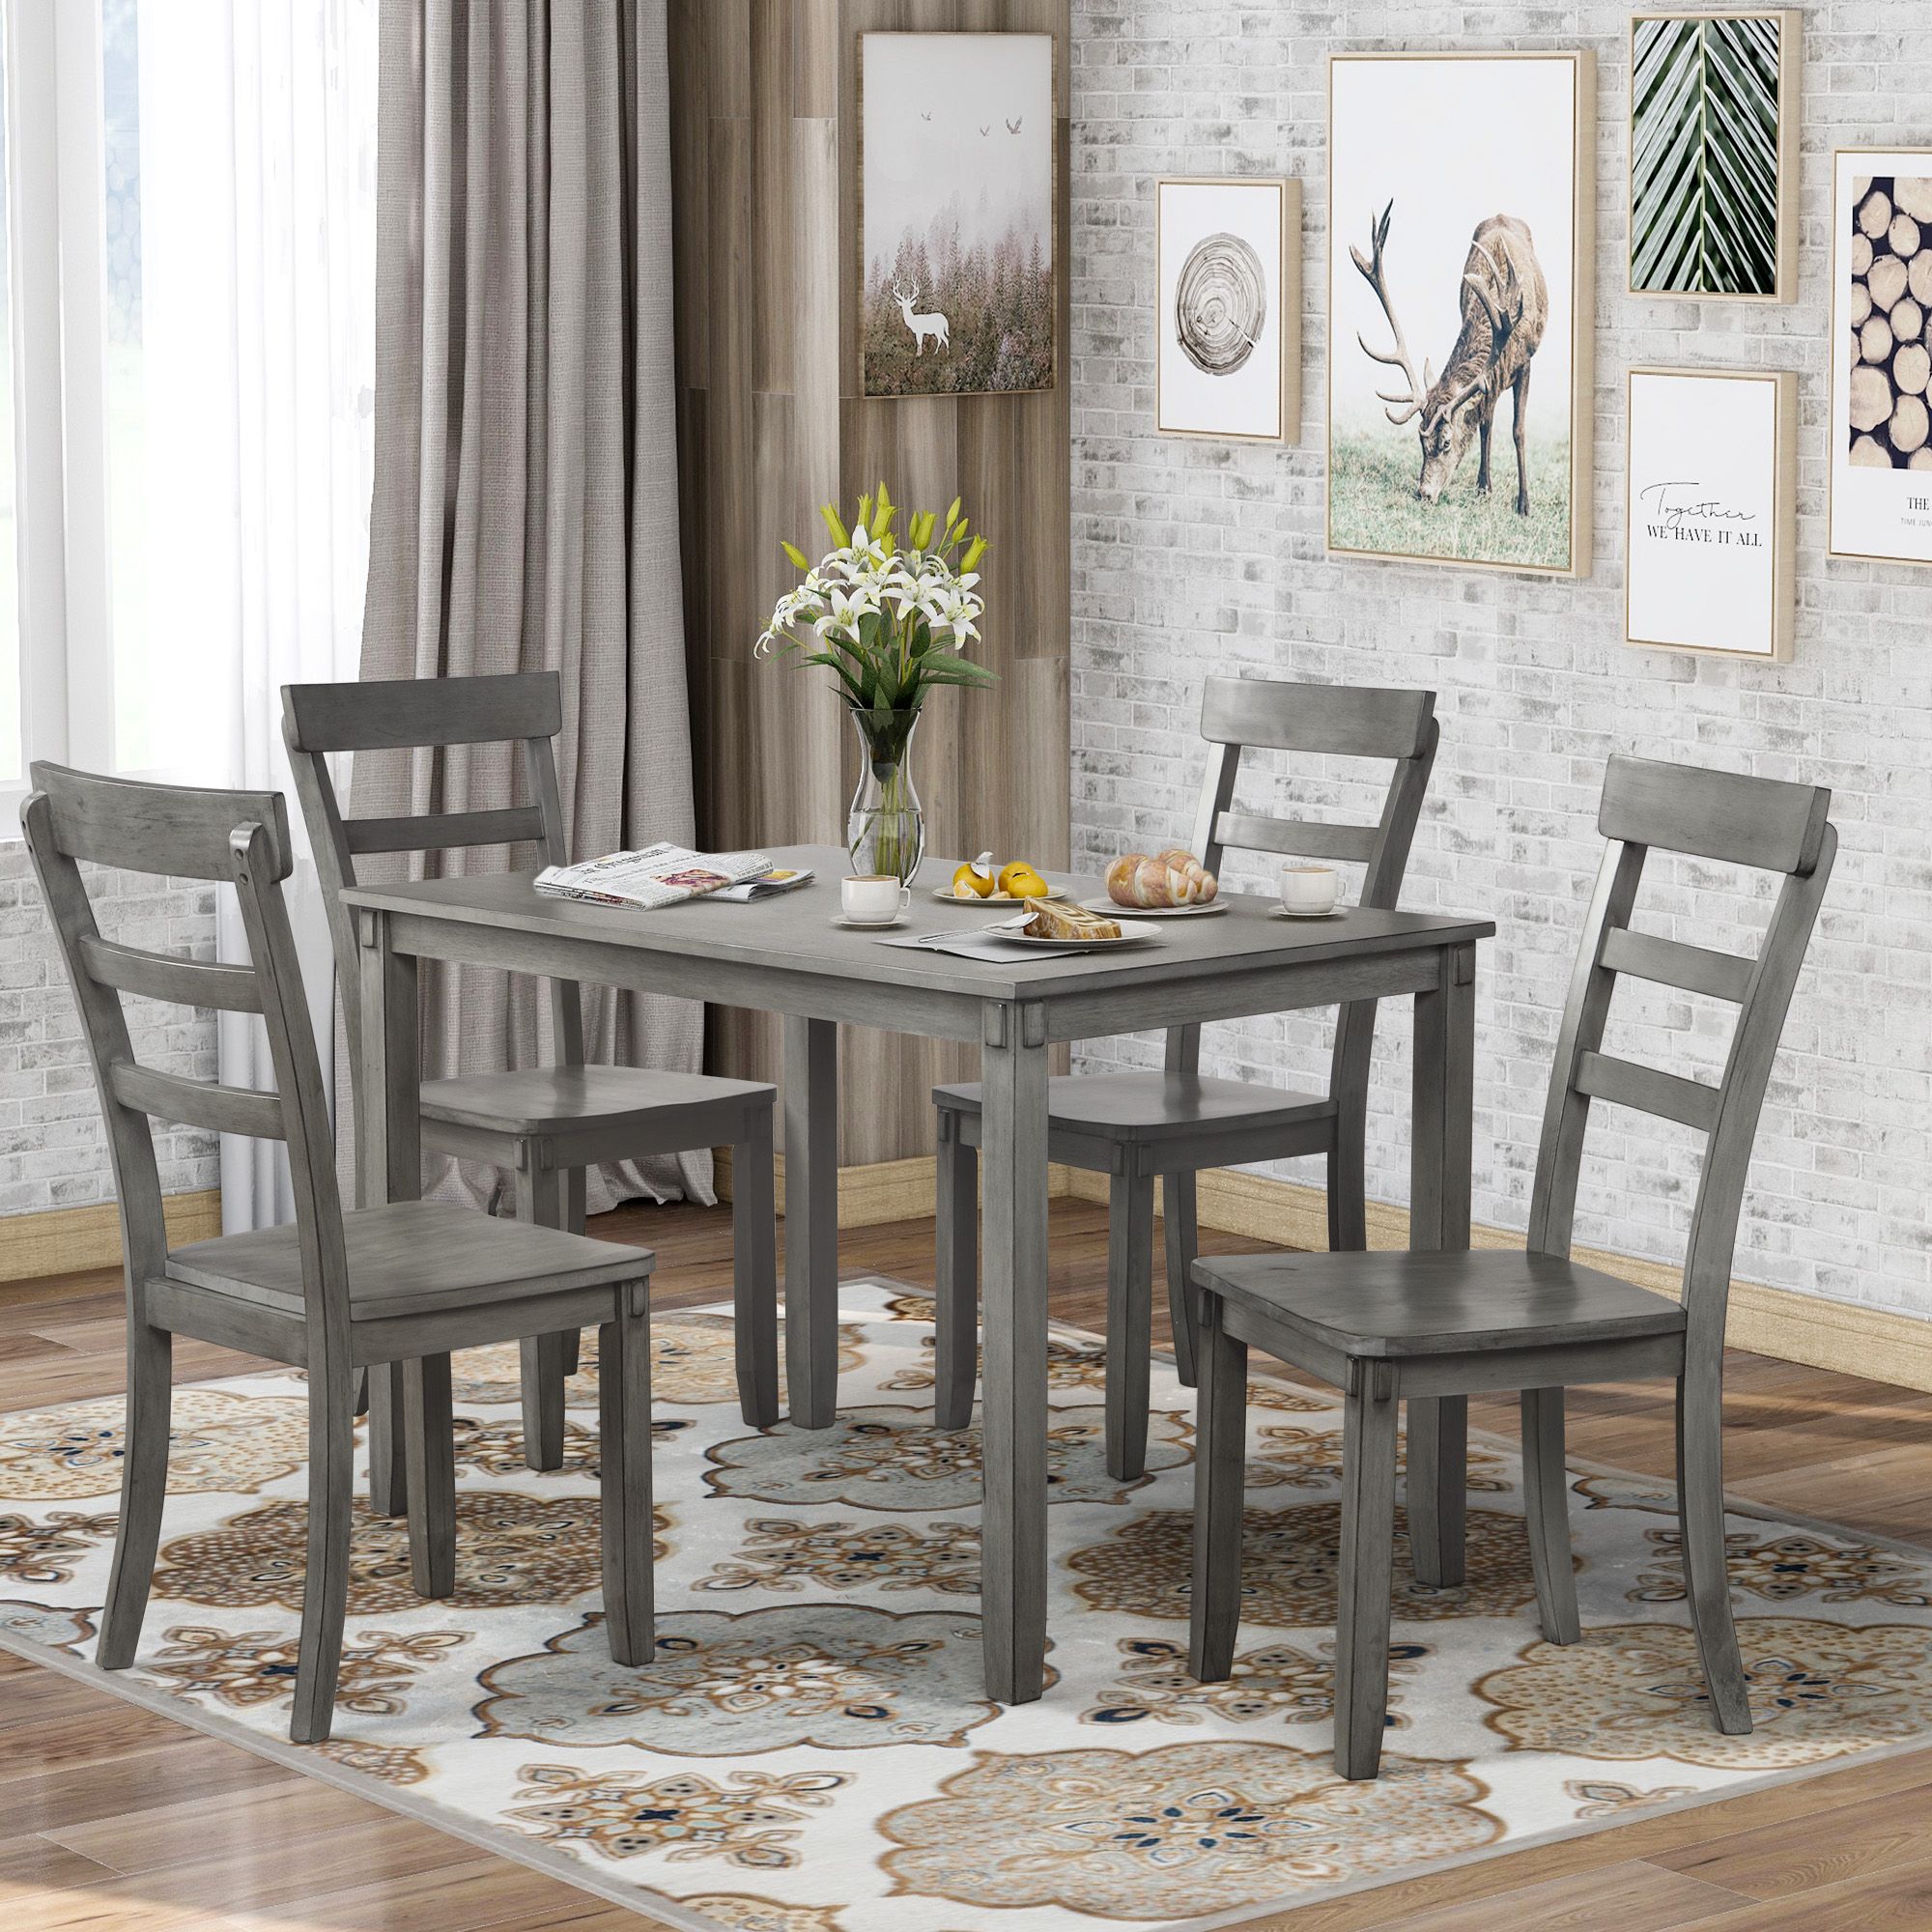 Most Up To Date Wood Bistro Table And Chairs Sets Pertaining To Dining Table Set With Table And 4 Chairs, 5 Piece Rectangular Family (View 6 of 15)